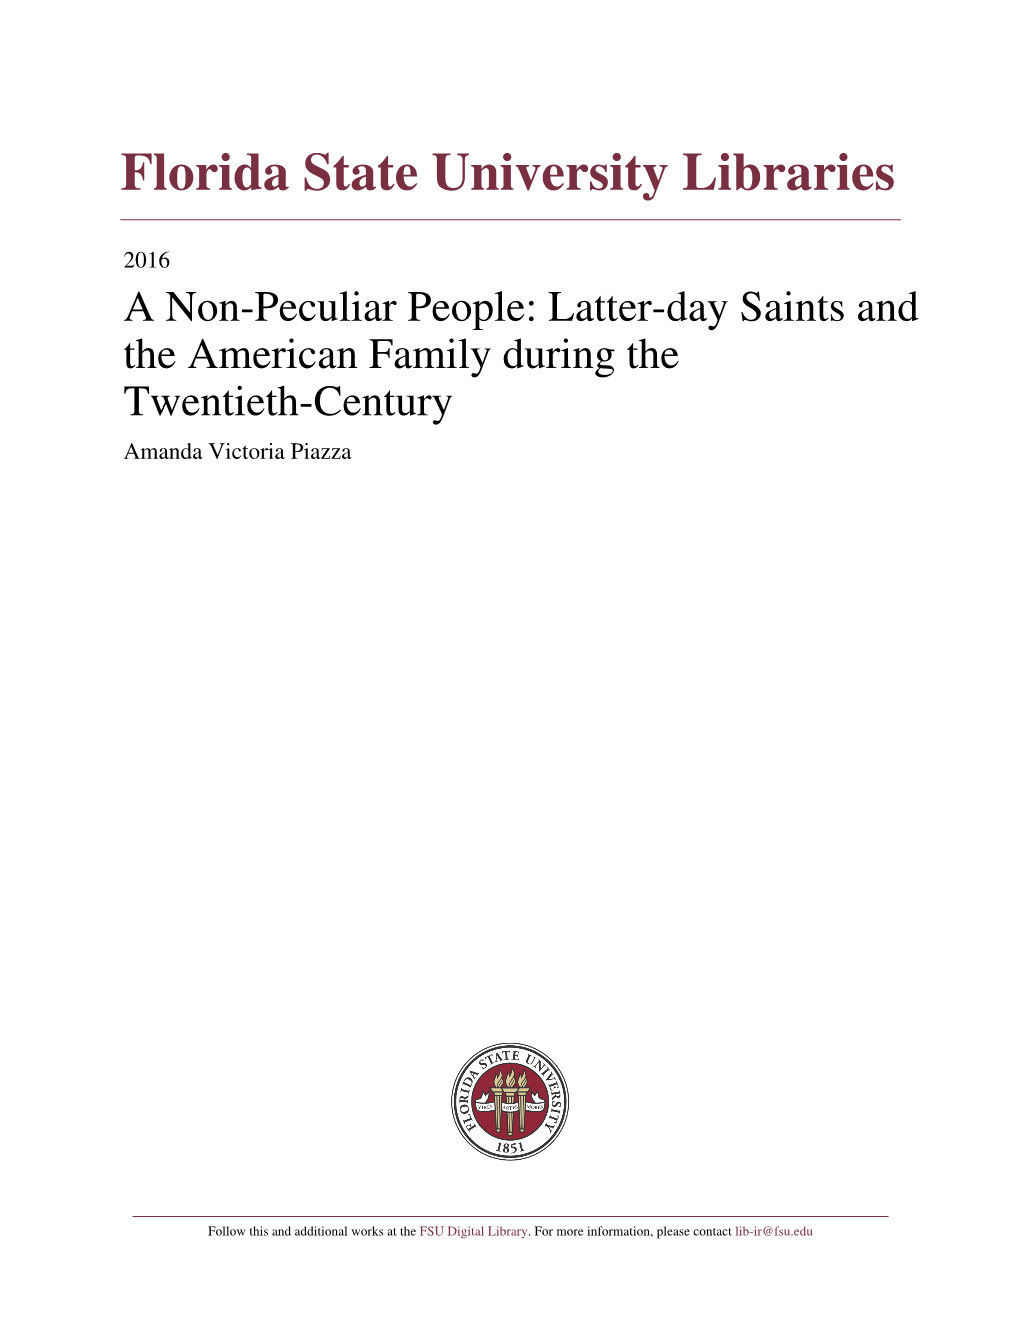 A Non-Peculiar People: Latter-Day Saints and the American Family During the Twentieth-Century Amanda Victoria Piazza